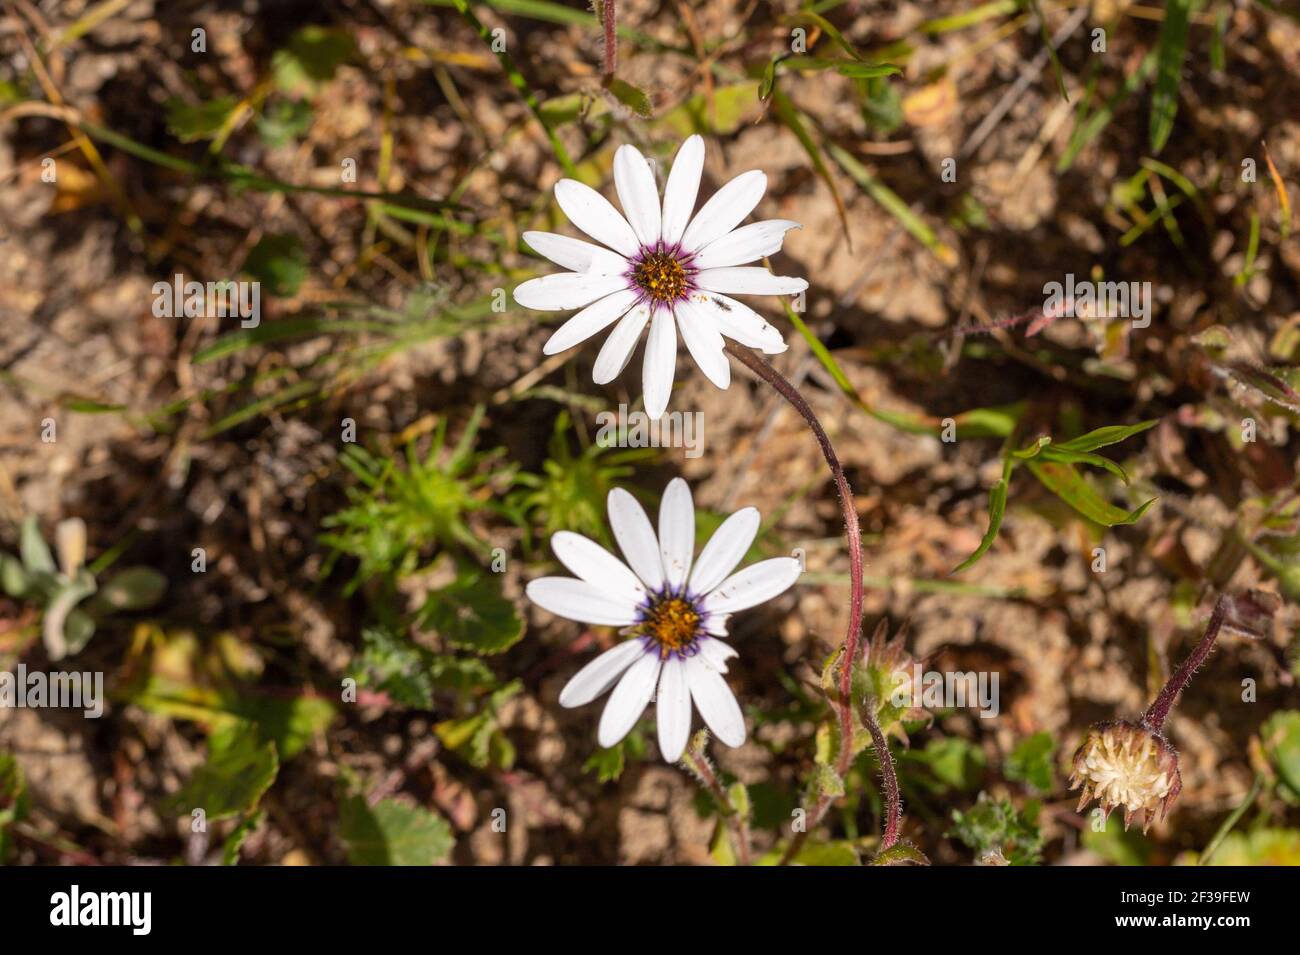 Two flowers of the common white African Daisy (Dimorphtotheca pluvialis) in natural habitat close to Darling in the Western Cape of South Africa Stock Photo